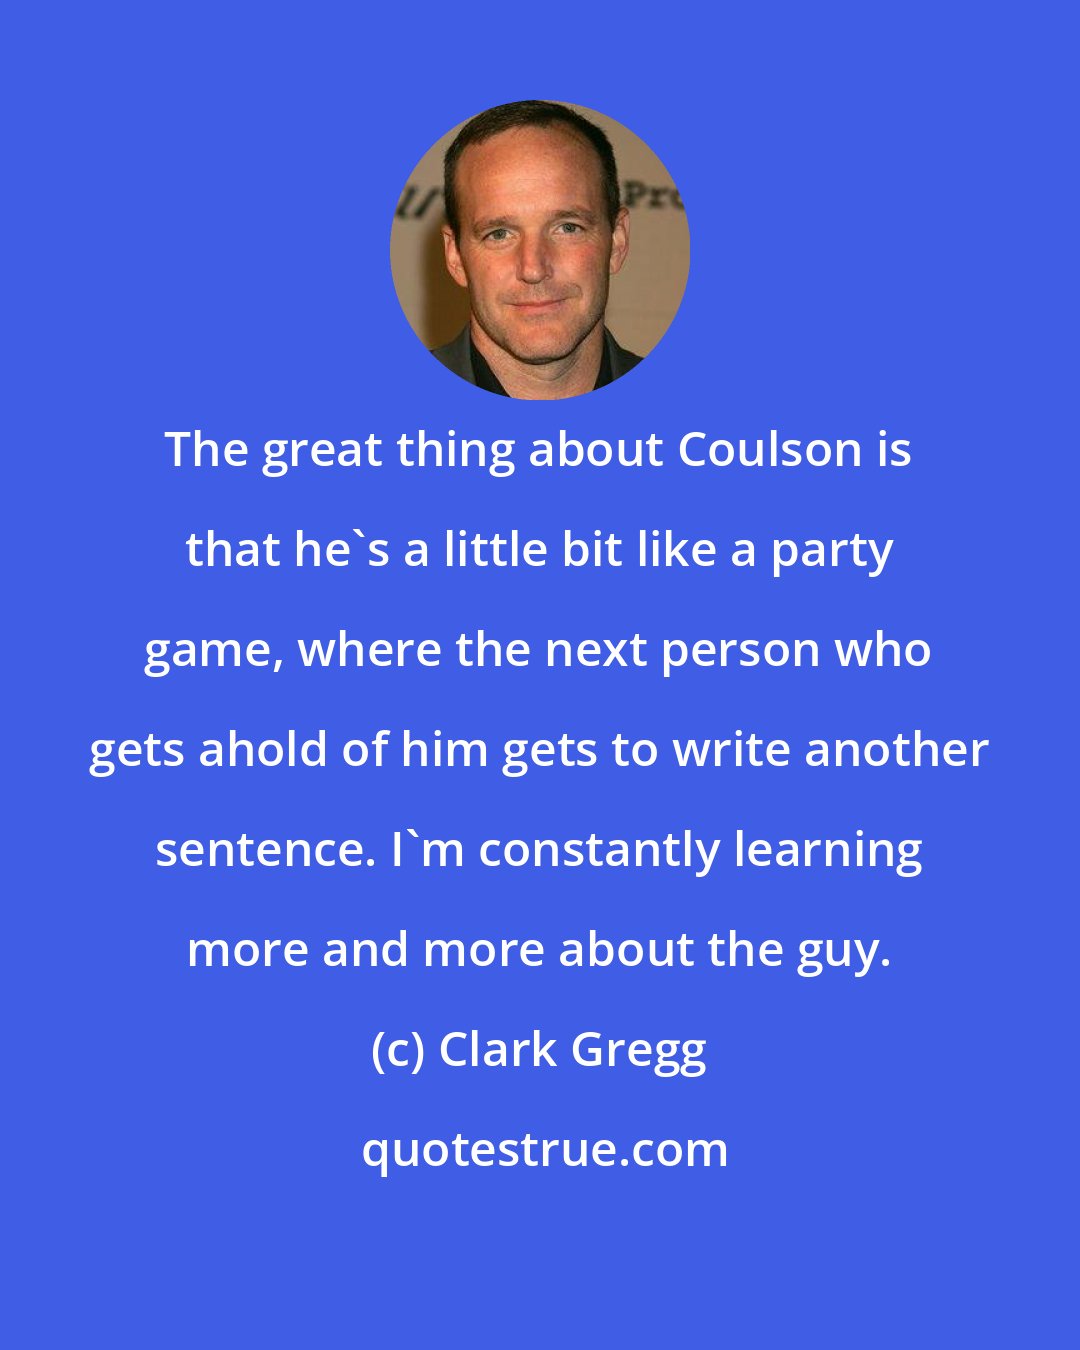 Clark Gregg: The great thing about Coulson is that he's a little bit like a party game, where the next person who gets ahold of him gets to write another sentence. I'm constantly learning more and more about the guy.